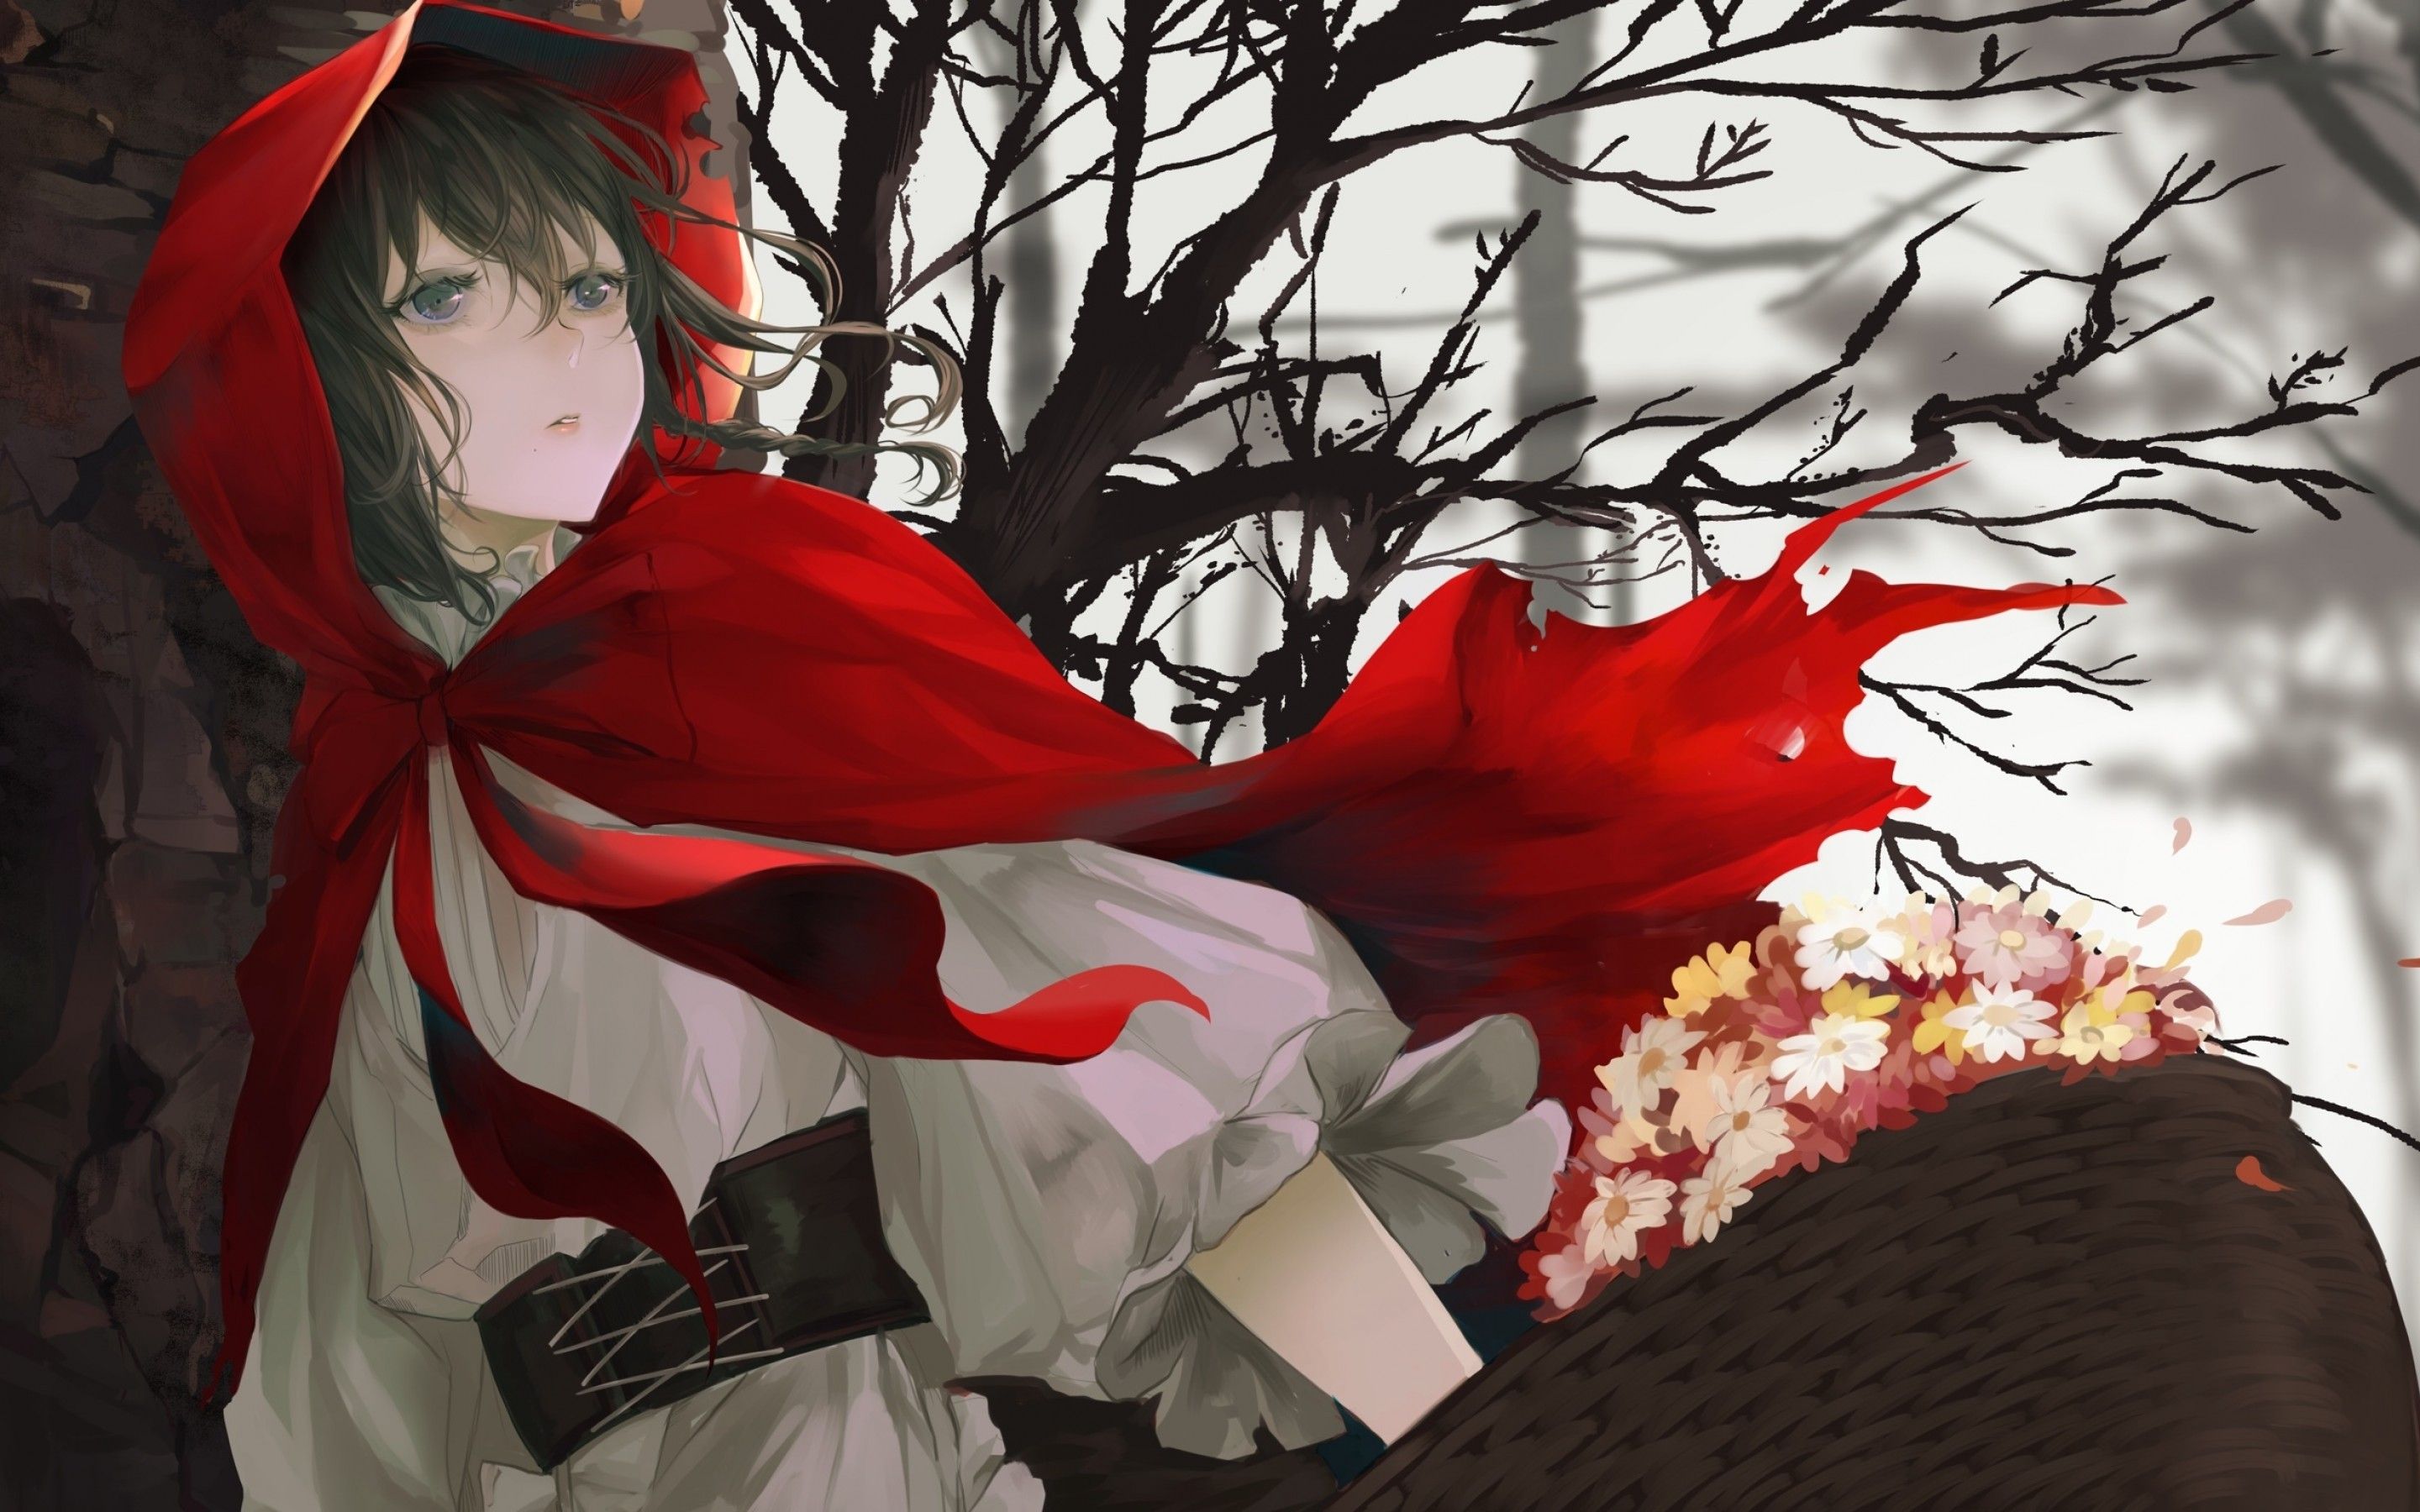 Download 2880x1800 Little Red Riding Hood, Anime Girl, Flowers Wallpaper for MacBook Pro 15 inch